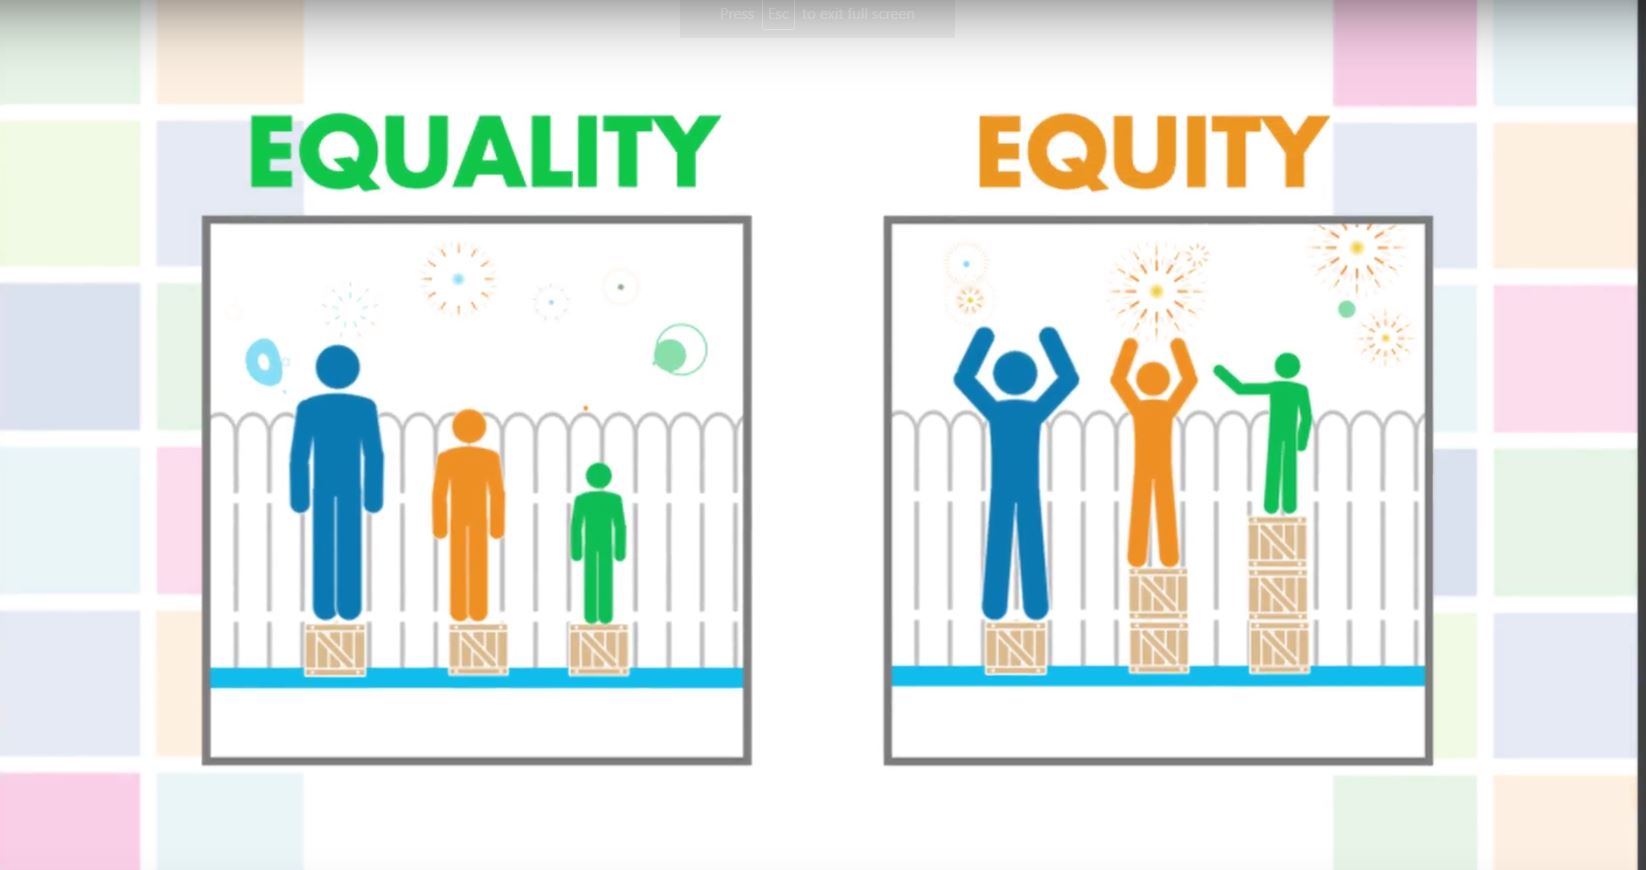 Screenshot from the video GBA+: Equality or Equity?